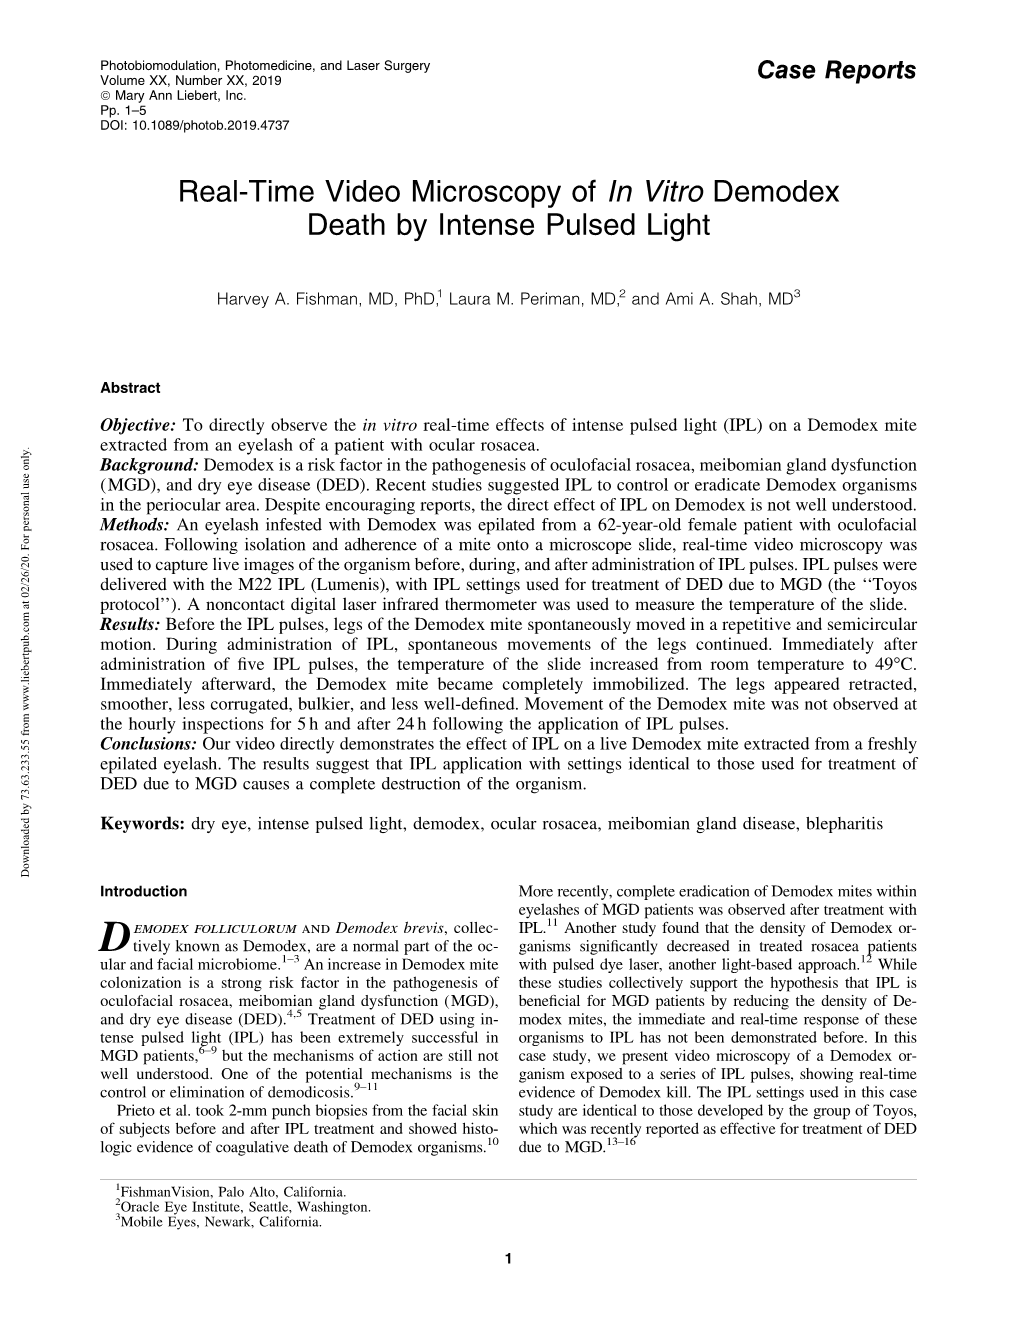 Real-Time Video Microscopy of in Vitro Demodex Death by Intense Pulsed Light